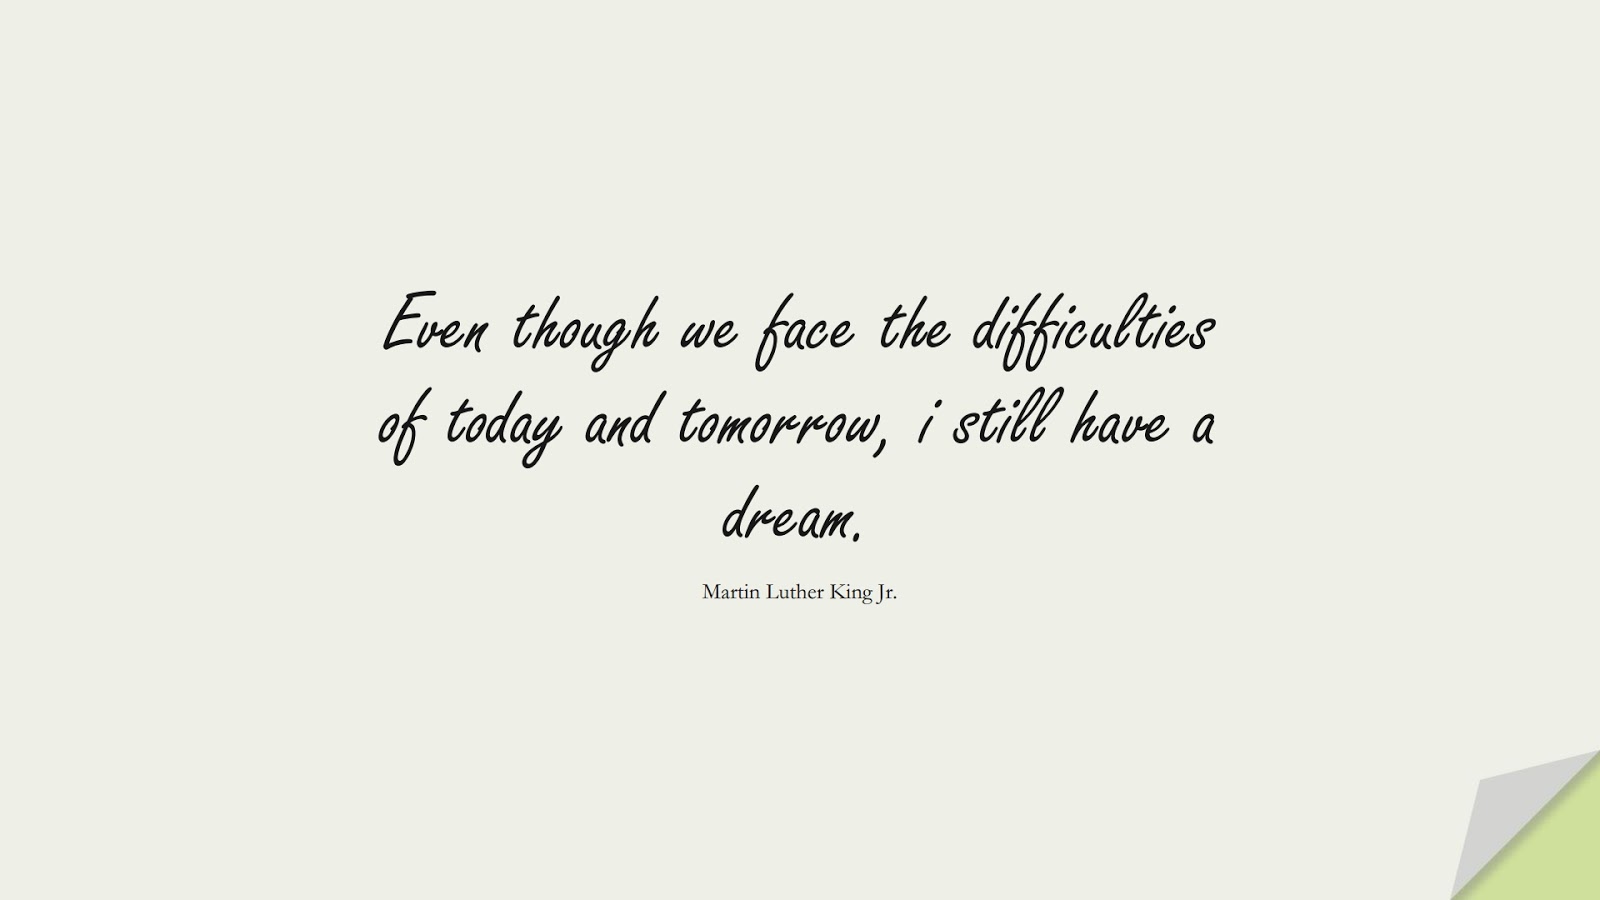 Even though we face the difficulties of today and tomorrow, i still have a dream. (Martin Luther King Jr.);  #MartinLutherKingJrQuotes